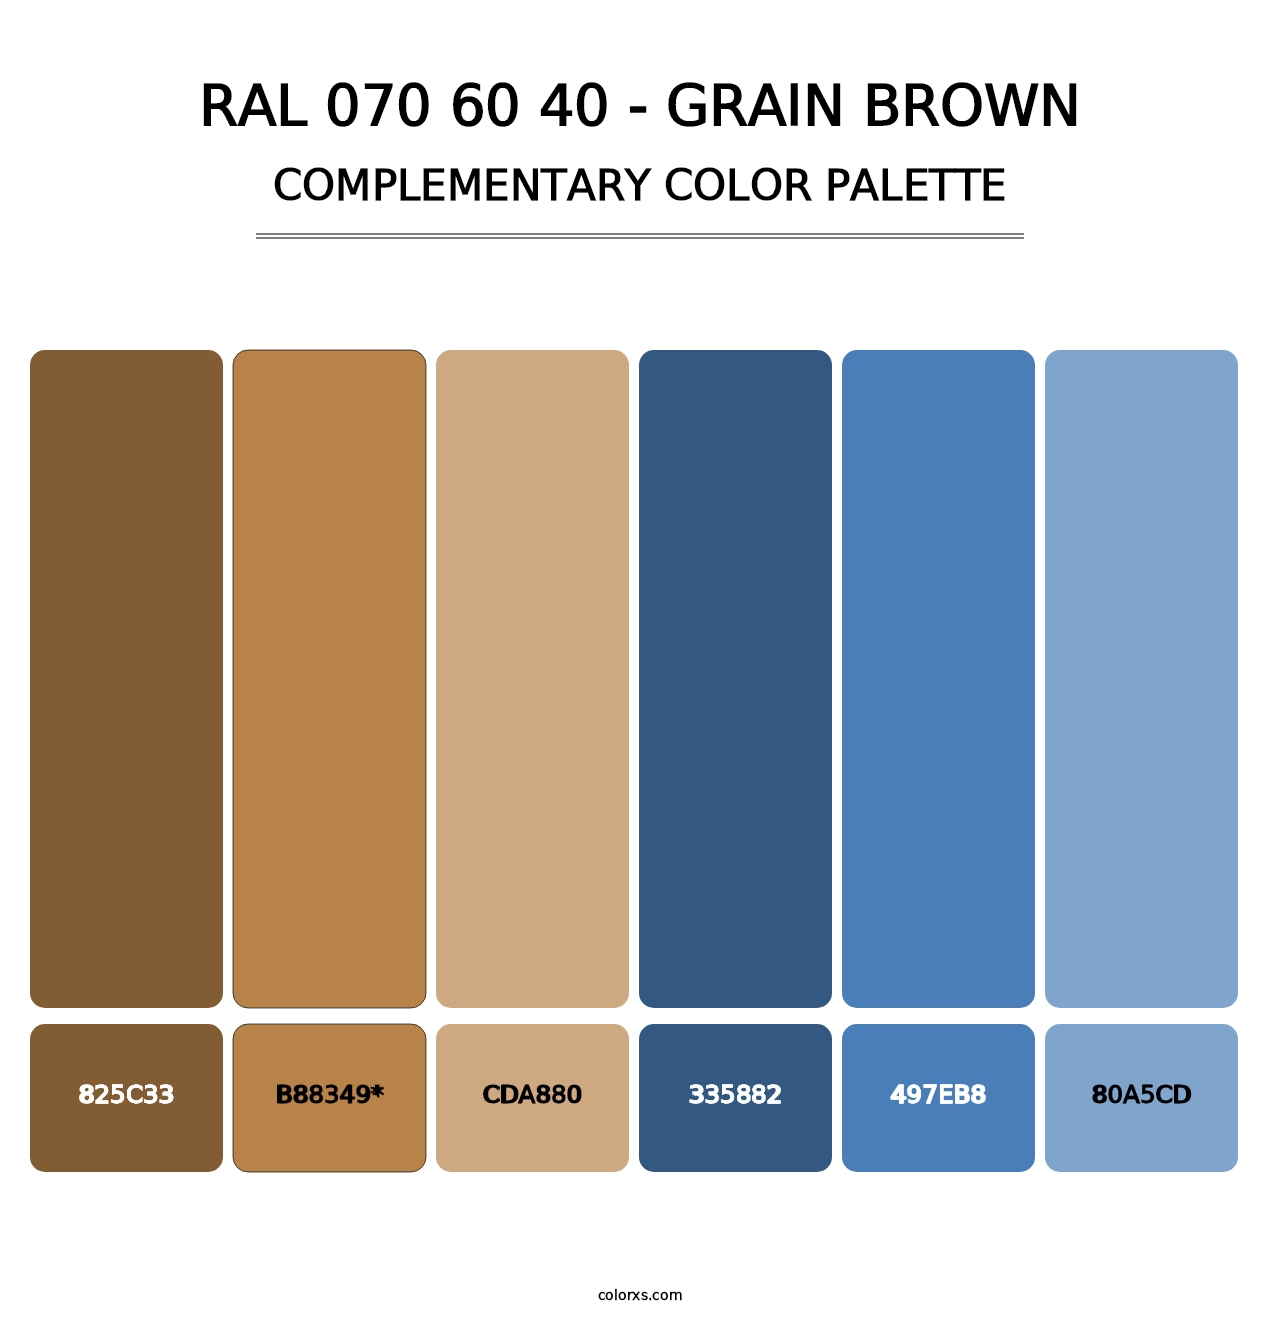 RAL 070 60 40 - Grain Brown - Complementary Color Palette